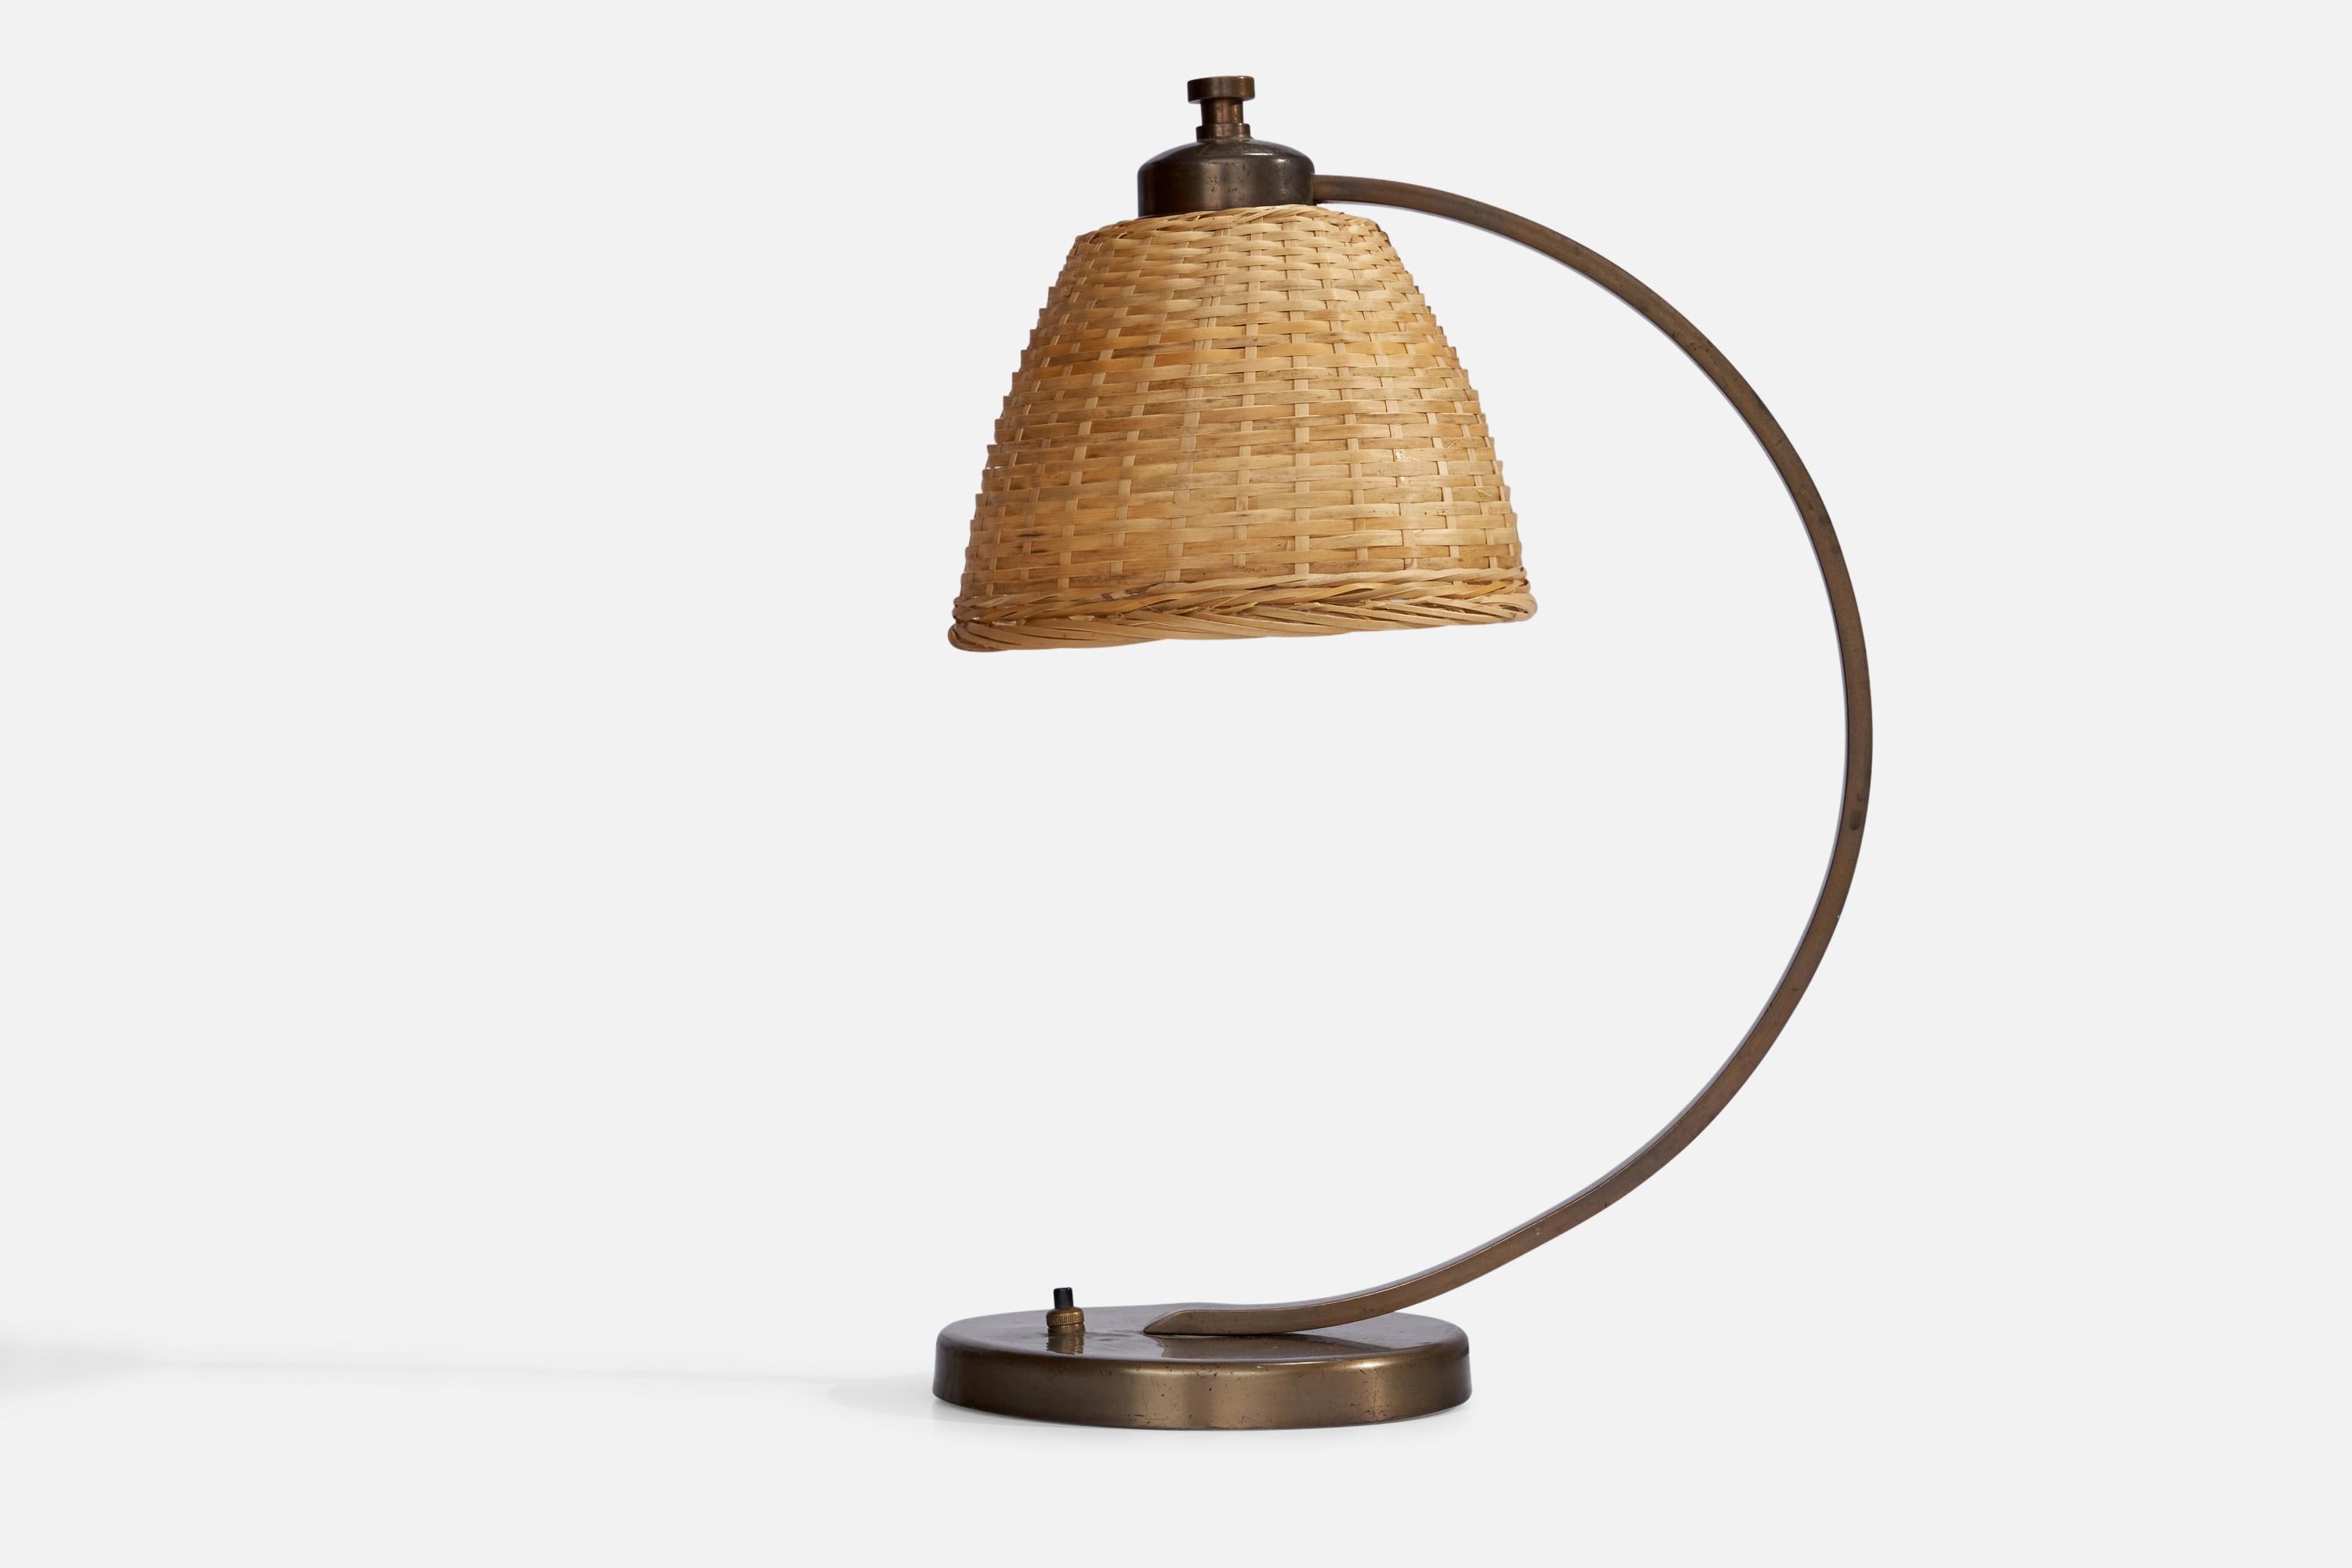 A brass and rattan table lamp designed and produced in Sweden, 1930s.

Overall Dimensions (inches): 16” H x 7”  W x 11.75” D
Stated dimensions include shade.
Bulb Specifications: E-26 Bulb
Number of Sockets: 1
All lighting will be converted for US